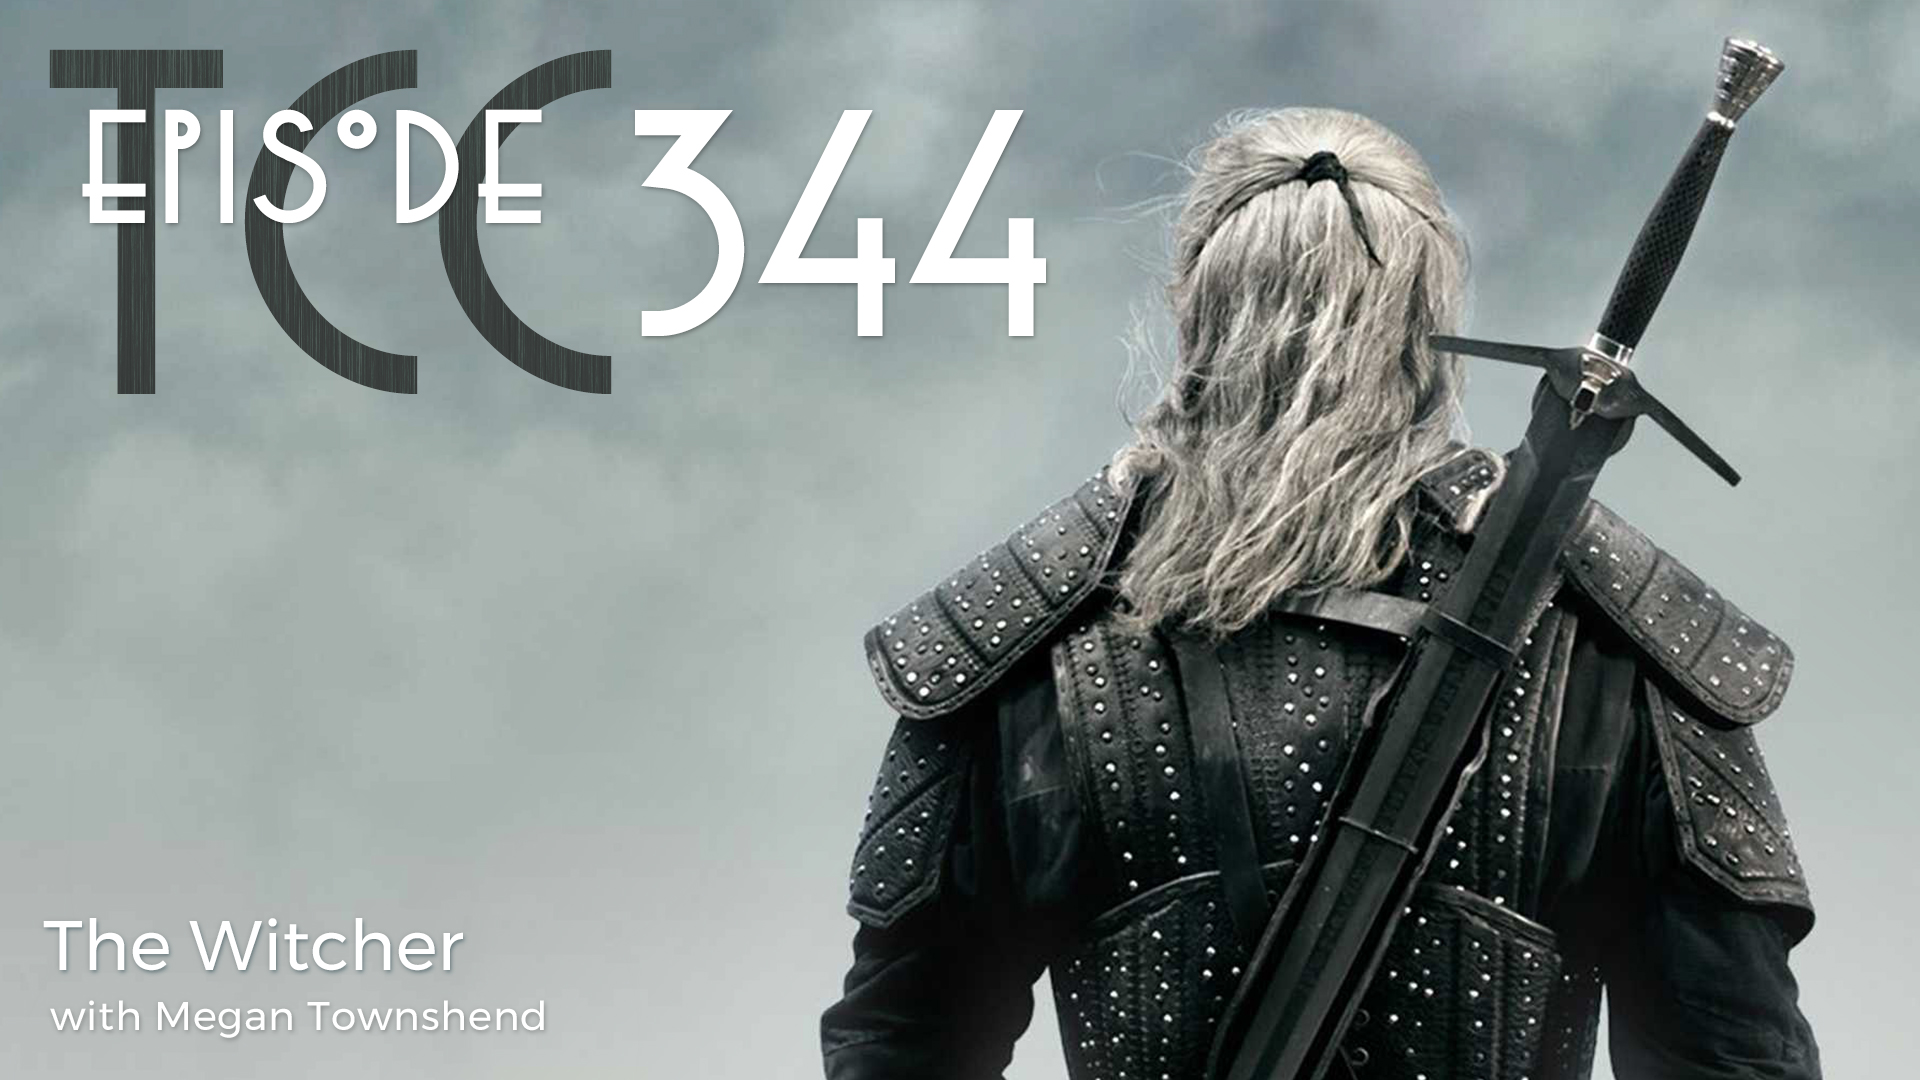 The Citadel Cafe 344: The Witcher